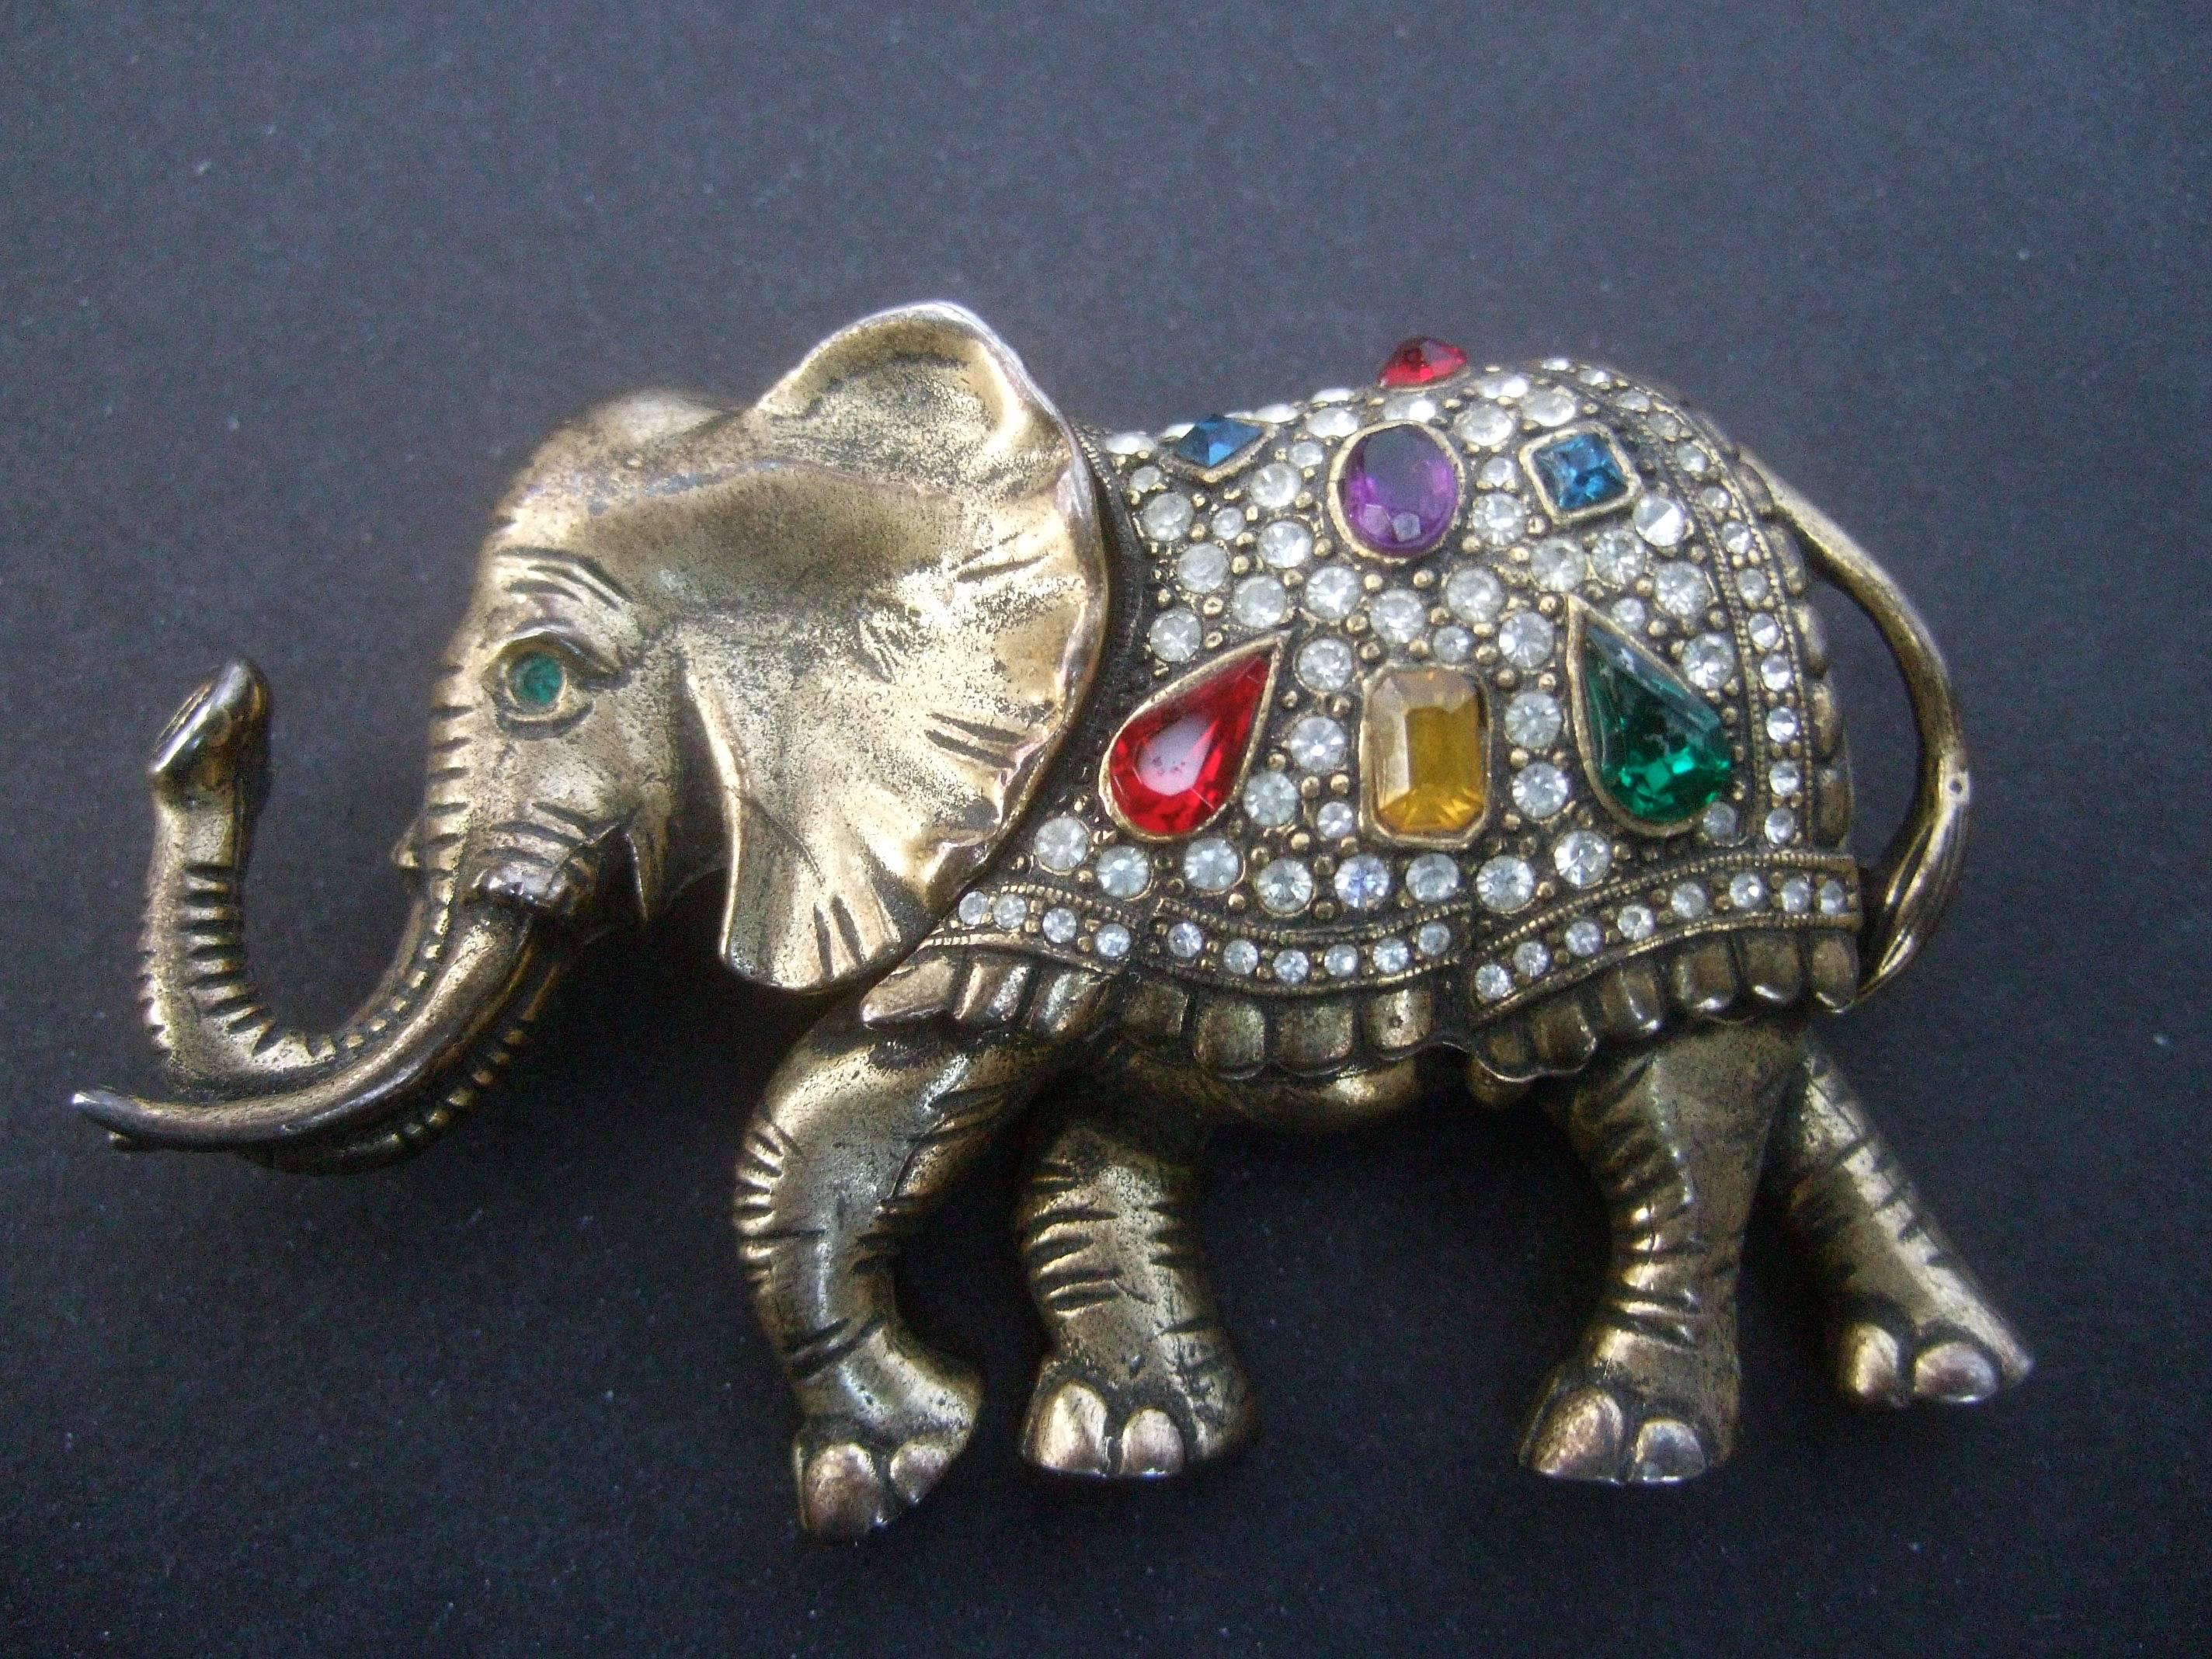 Jeweled crystal brass metal elephant brooch c 1970s
The majestic brass metal elephant brooch is encrusted 
with a collection of jewel tone crystals 

The jewel tone crystals are juxtaposed with a series 
of glittering clear pave crystals. The brass